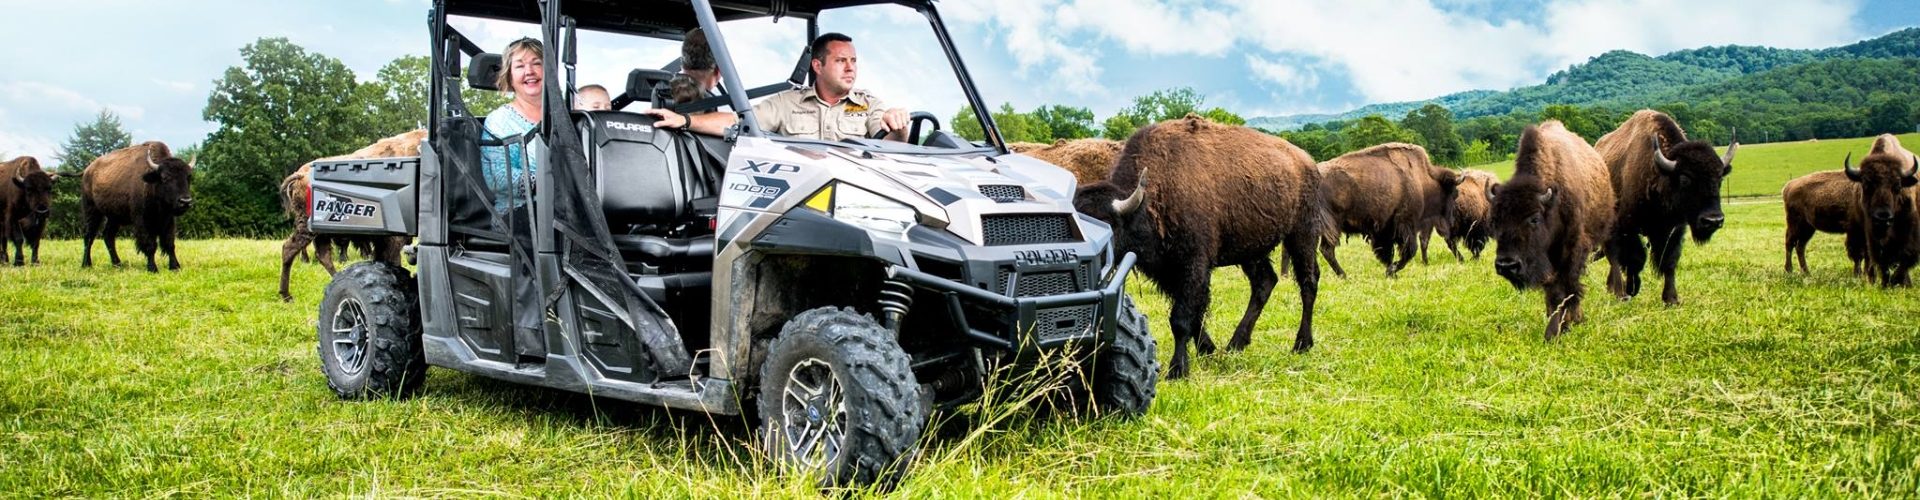 Promised Land Zoo in Branson expands with 65 acres of additional wildlife habitats, tram tours, and more.